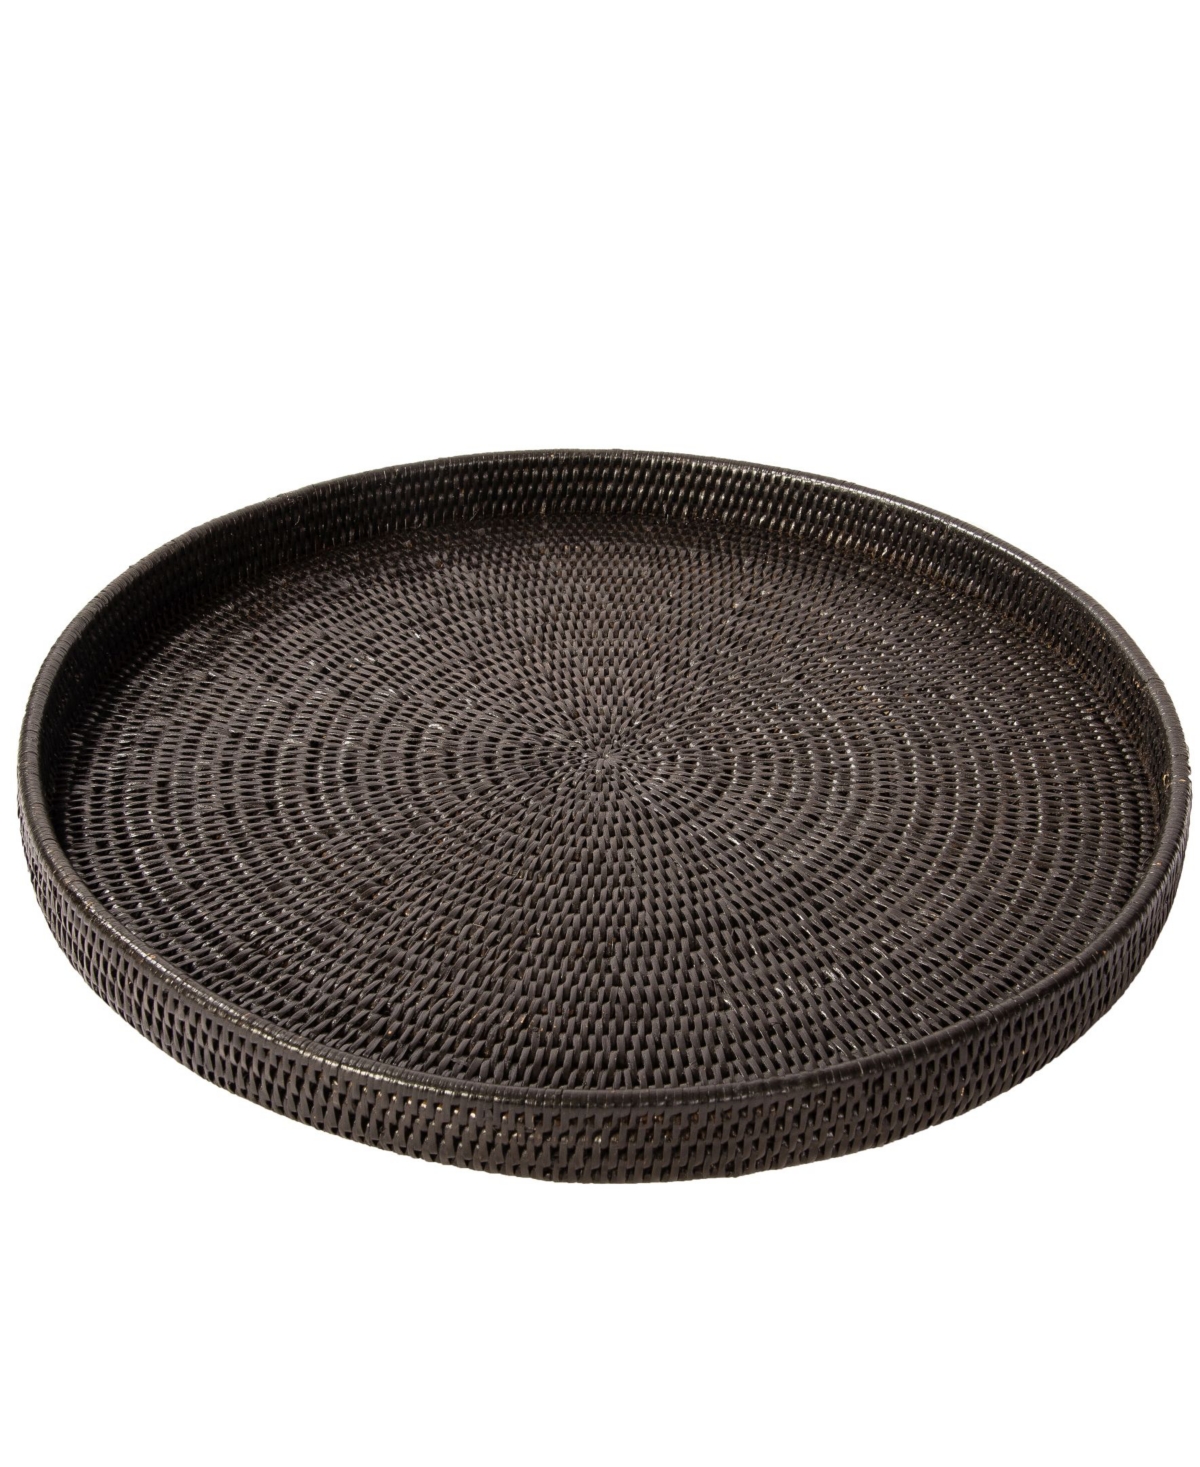 Artifacts Trading Company Artifacts Rattan Round Serving-ottoman Tray With Glass Insert In Dark Brown